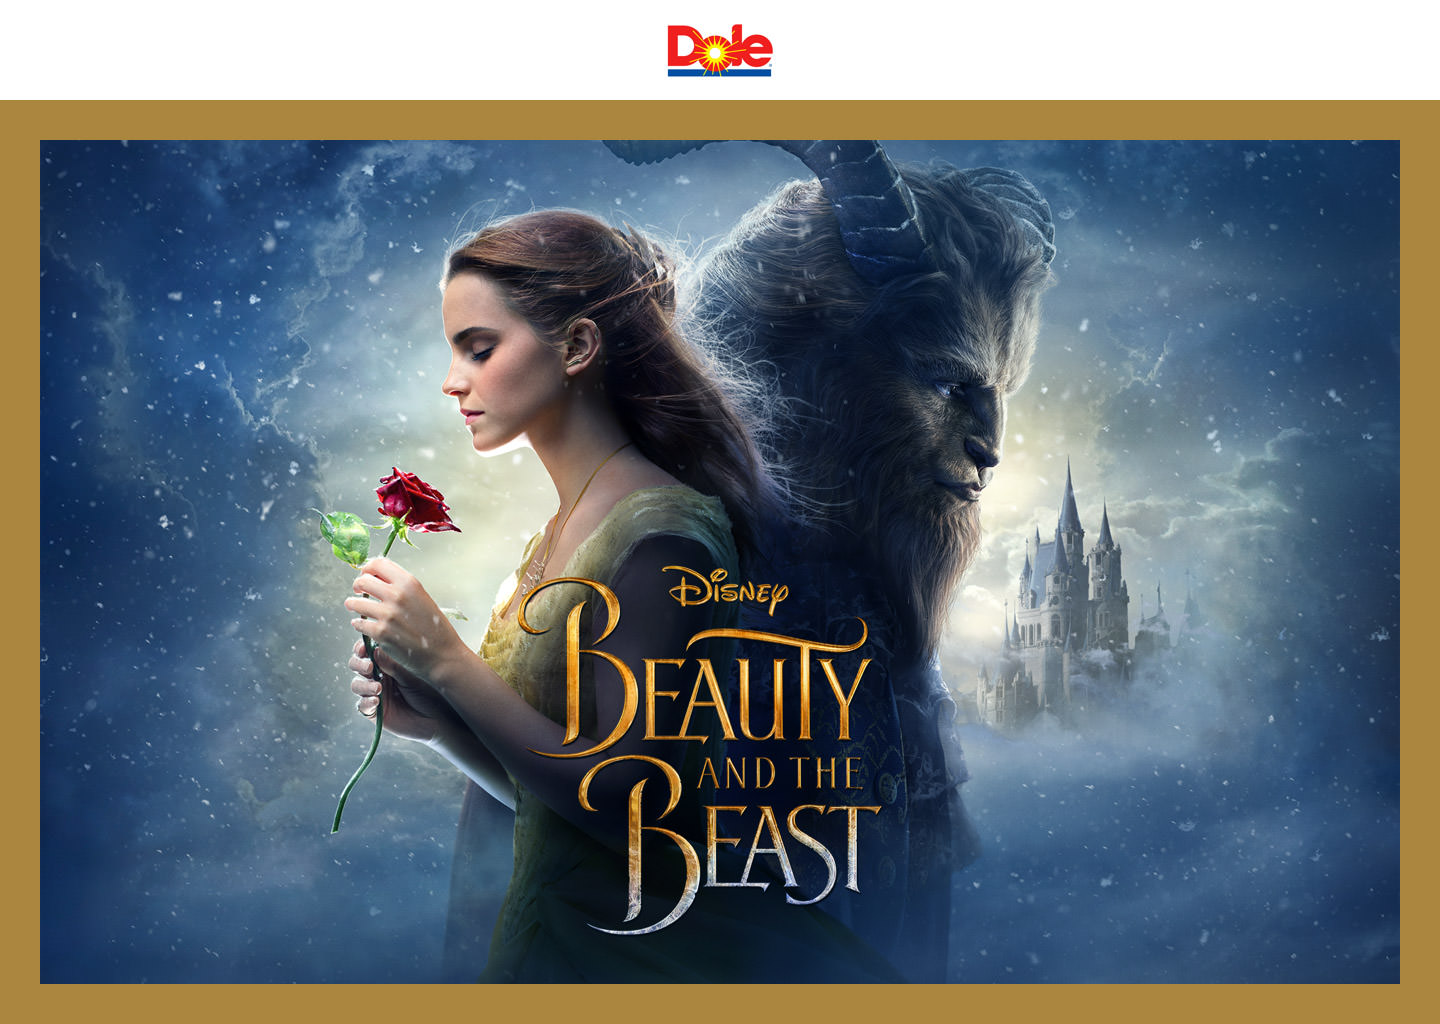 The Beauty & The Beast landing page design as part of the Dole/Disney partnership